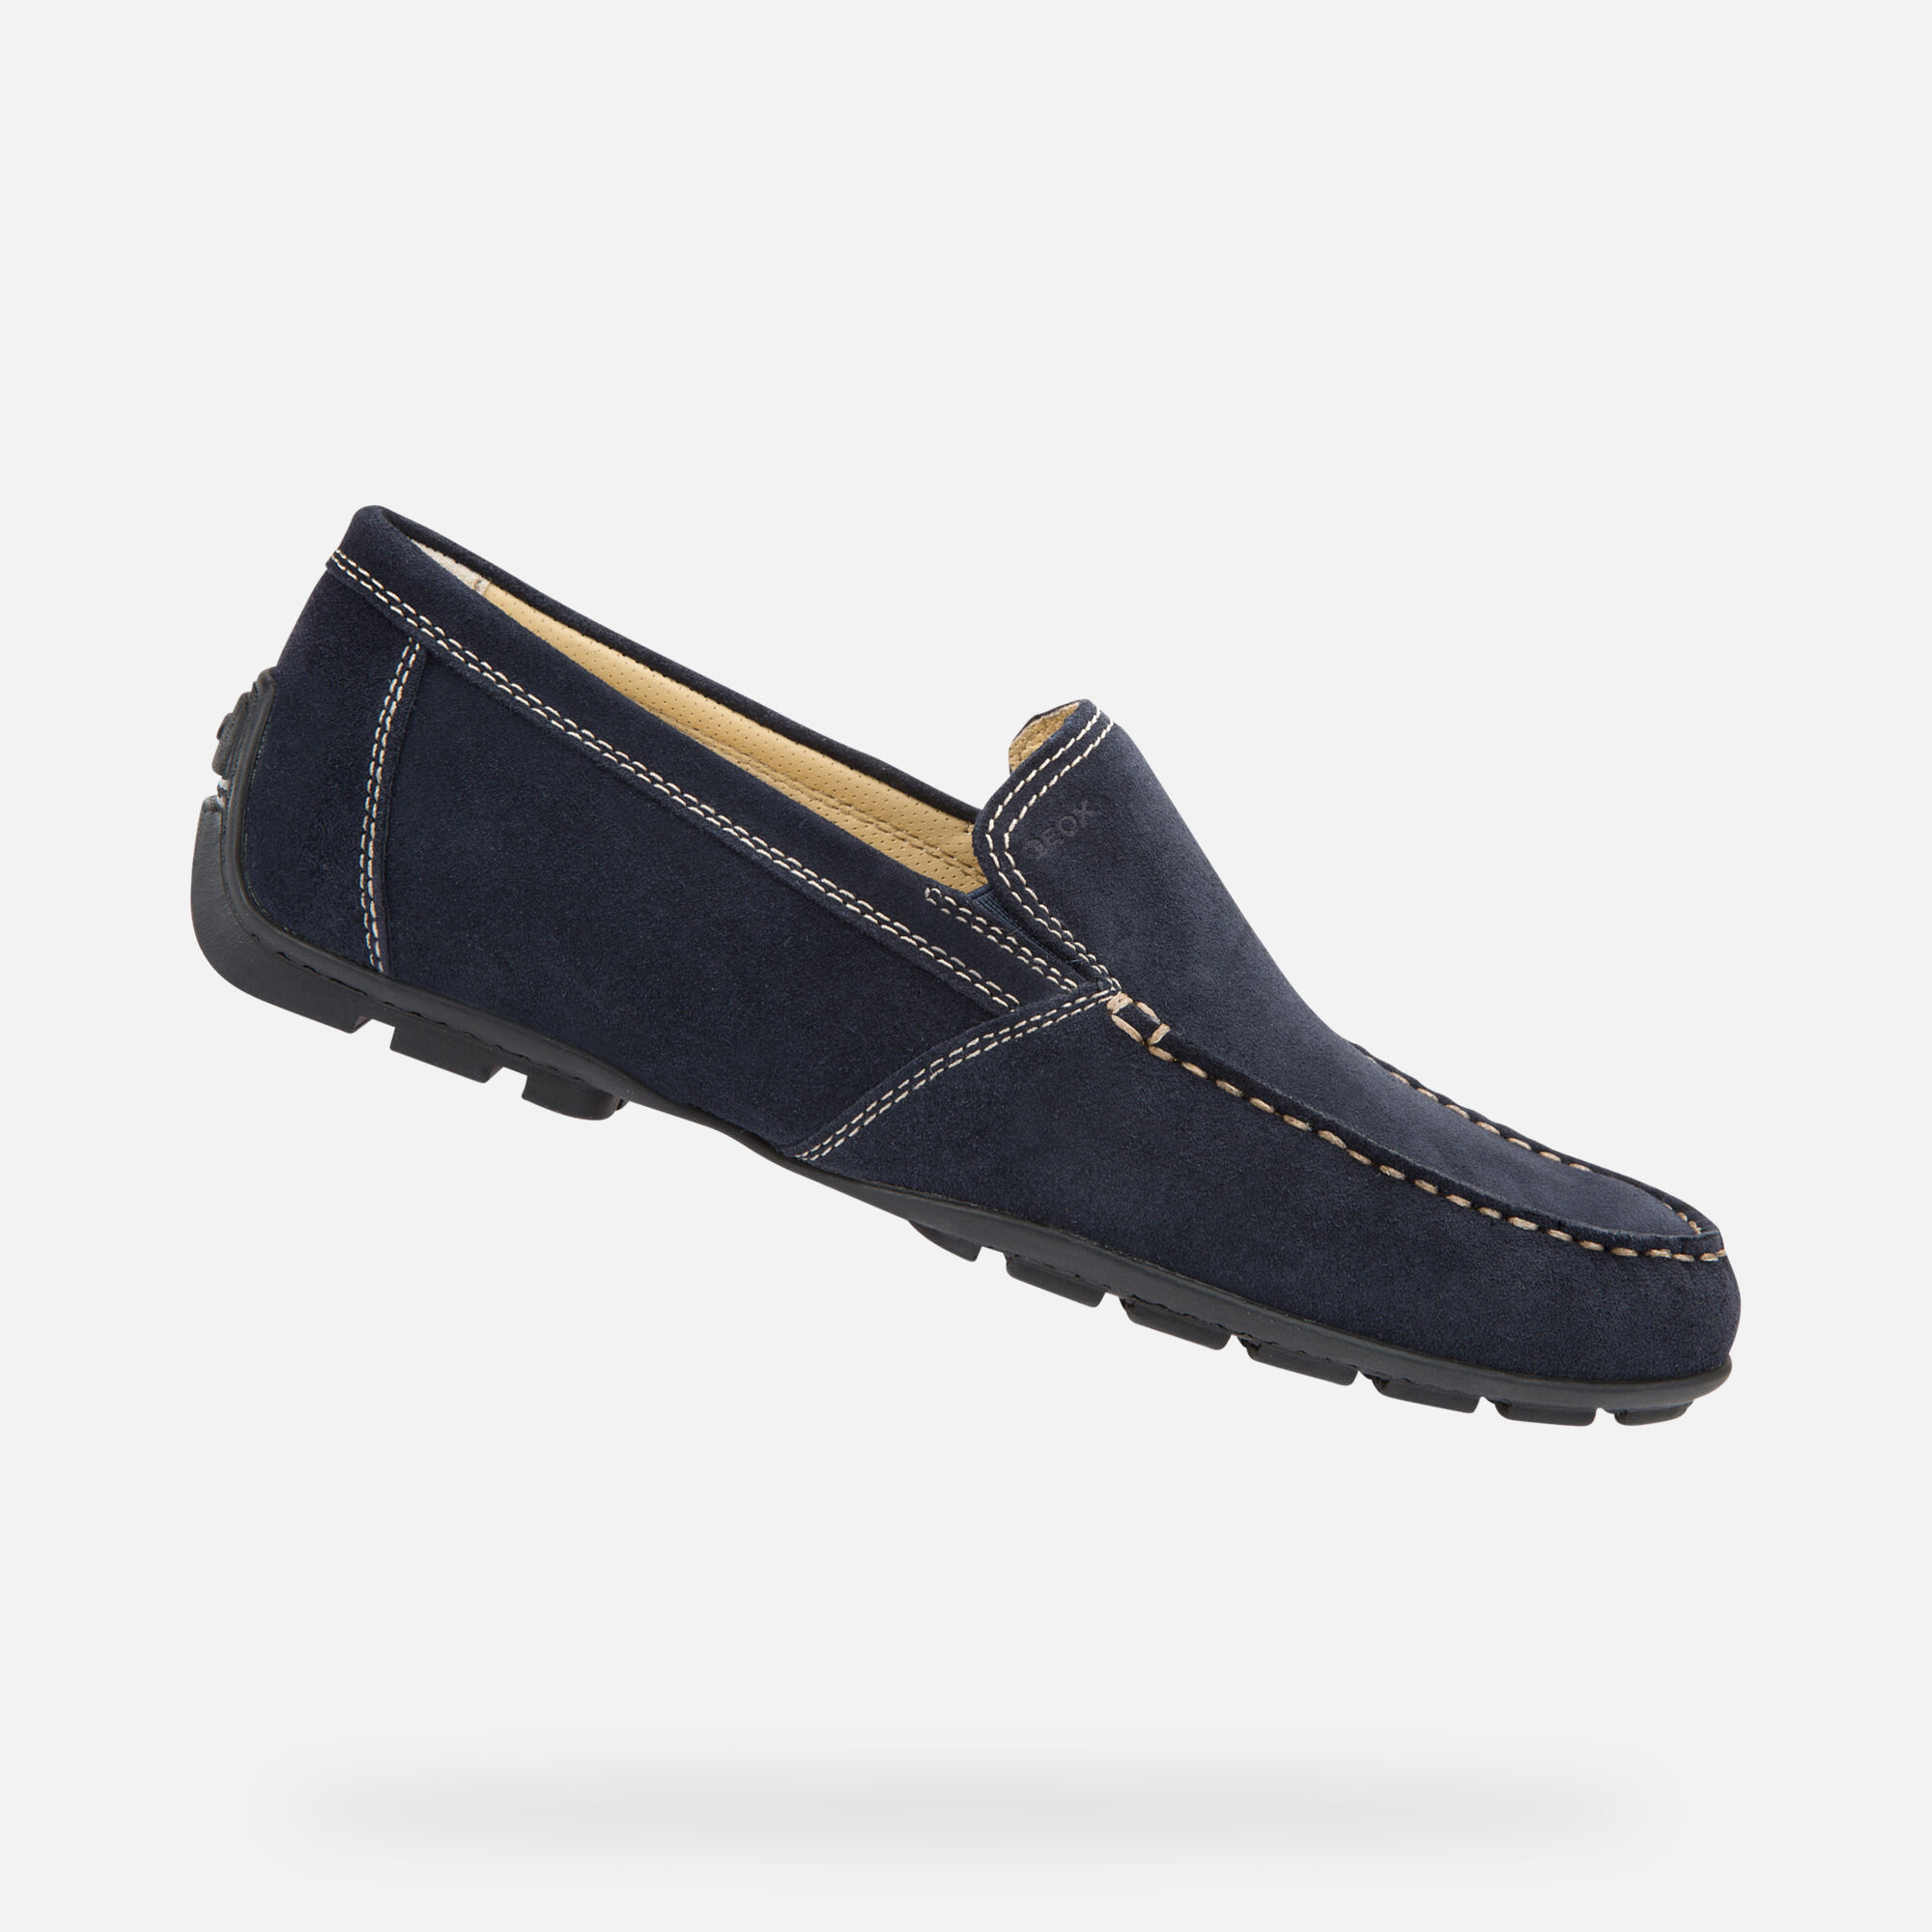 geox blue suede shoes